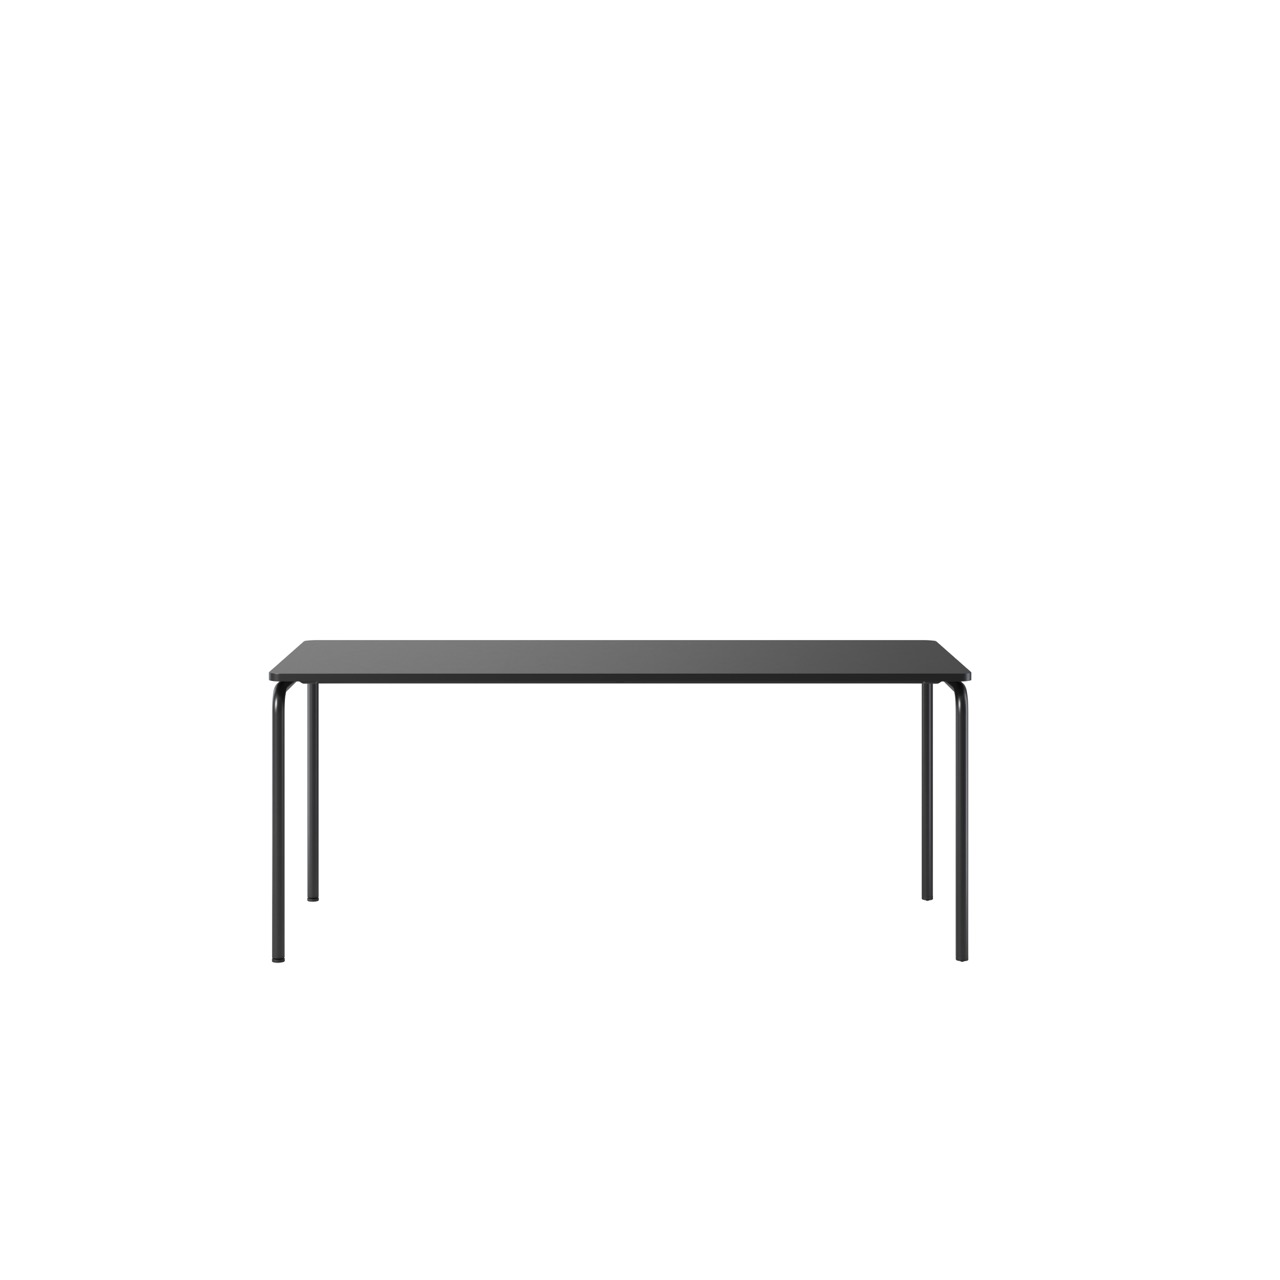 OCEE&FOUR - Tables - FourReal 74 - 180 x 80 - Straight - Packshot Image 2 Large